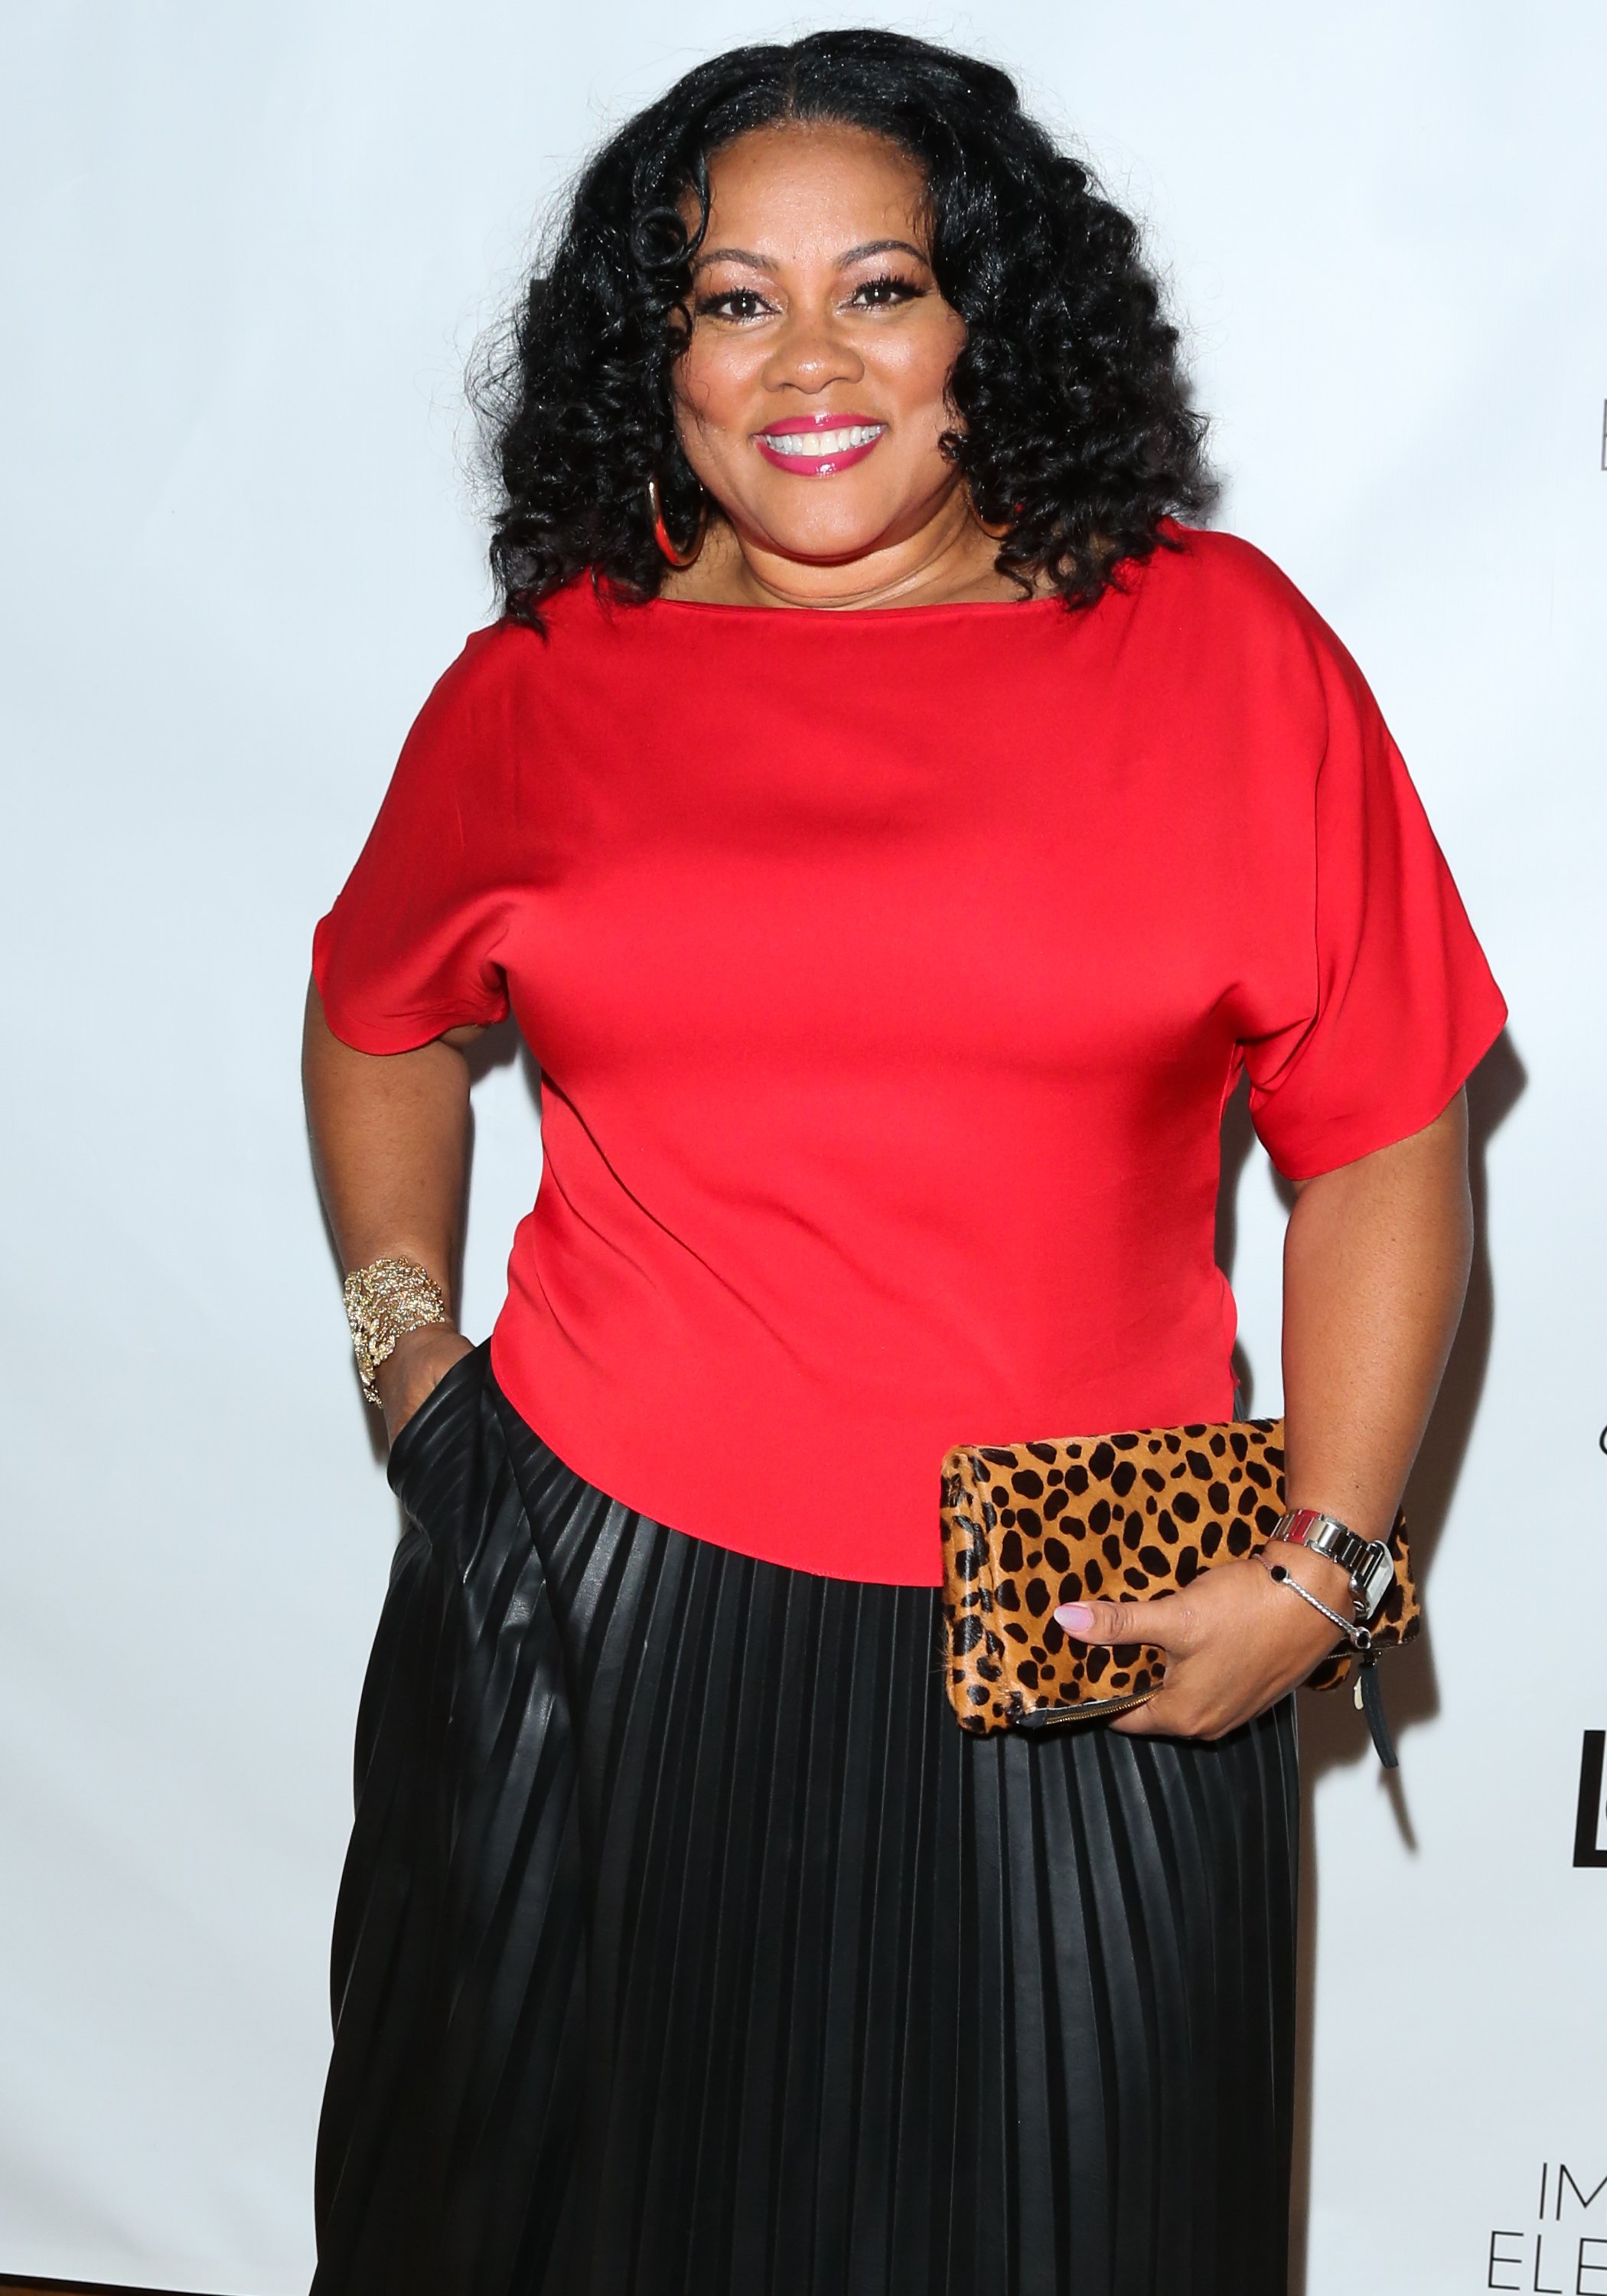 Lela Rochon at the release party for the book "Every Day I'm Hustling" at Rain Bar and Lounge on April 8, 2018 in Studio City, California | Photo: Getty Images